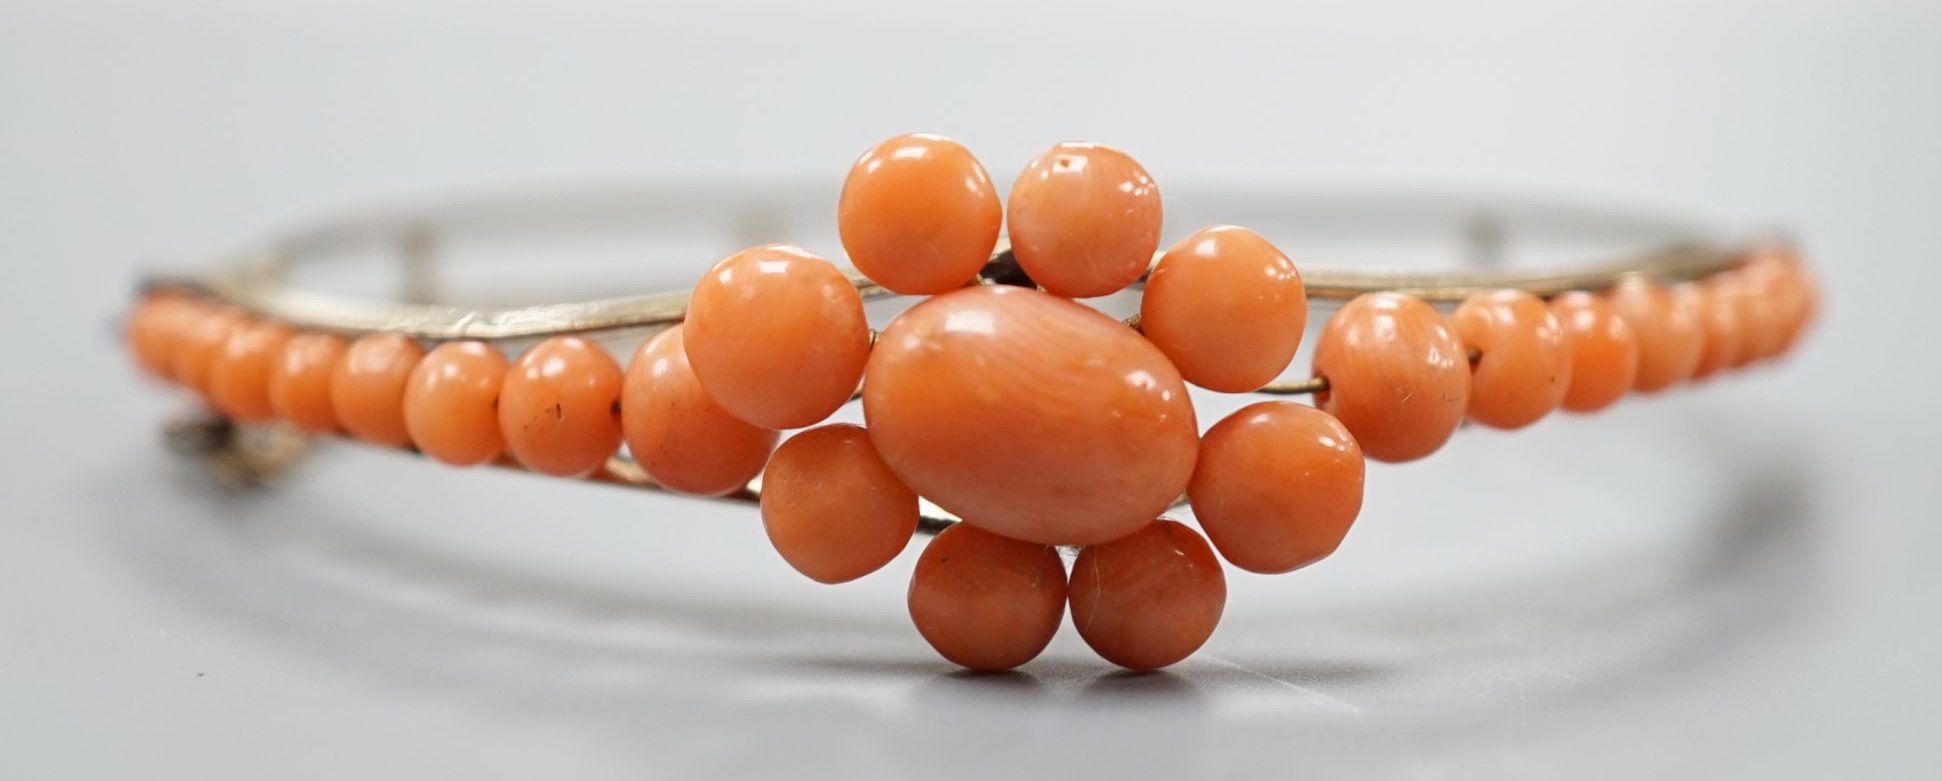 A gold plated and coral bead cluster set hinged bangle.